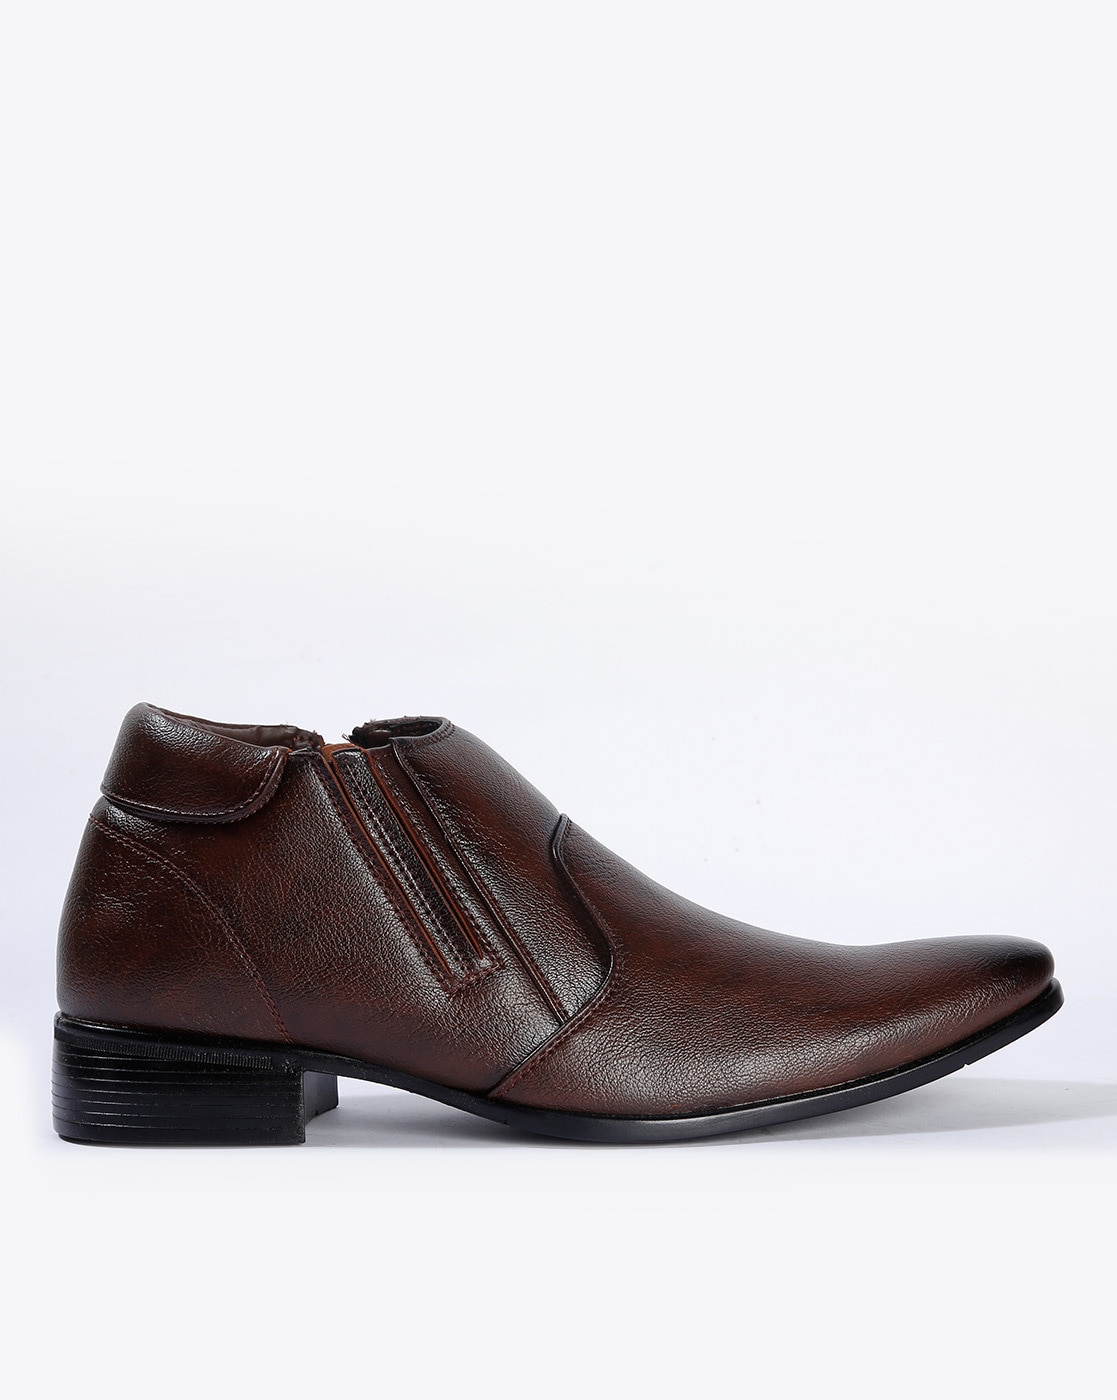 liberty leather shoes online